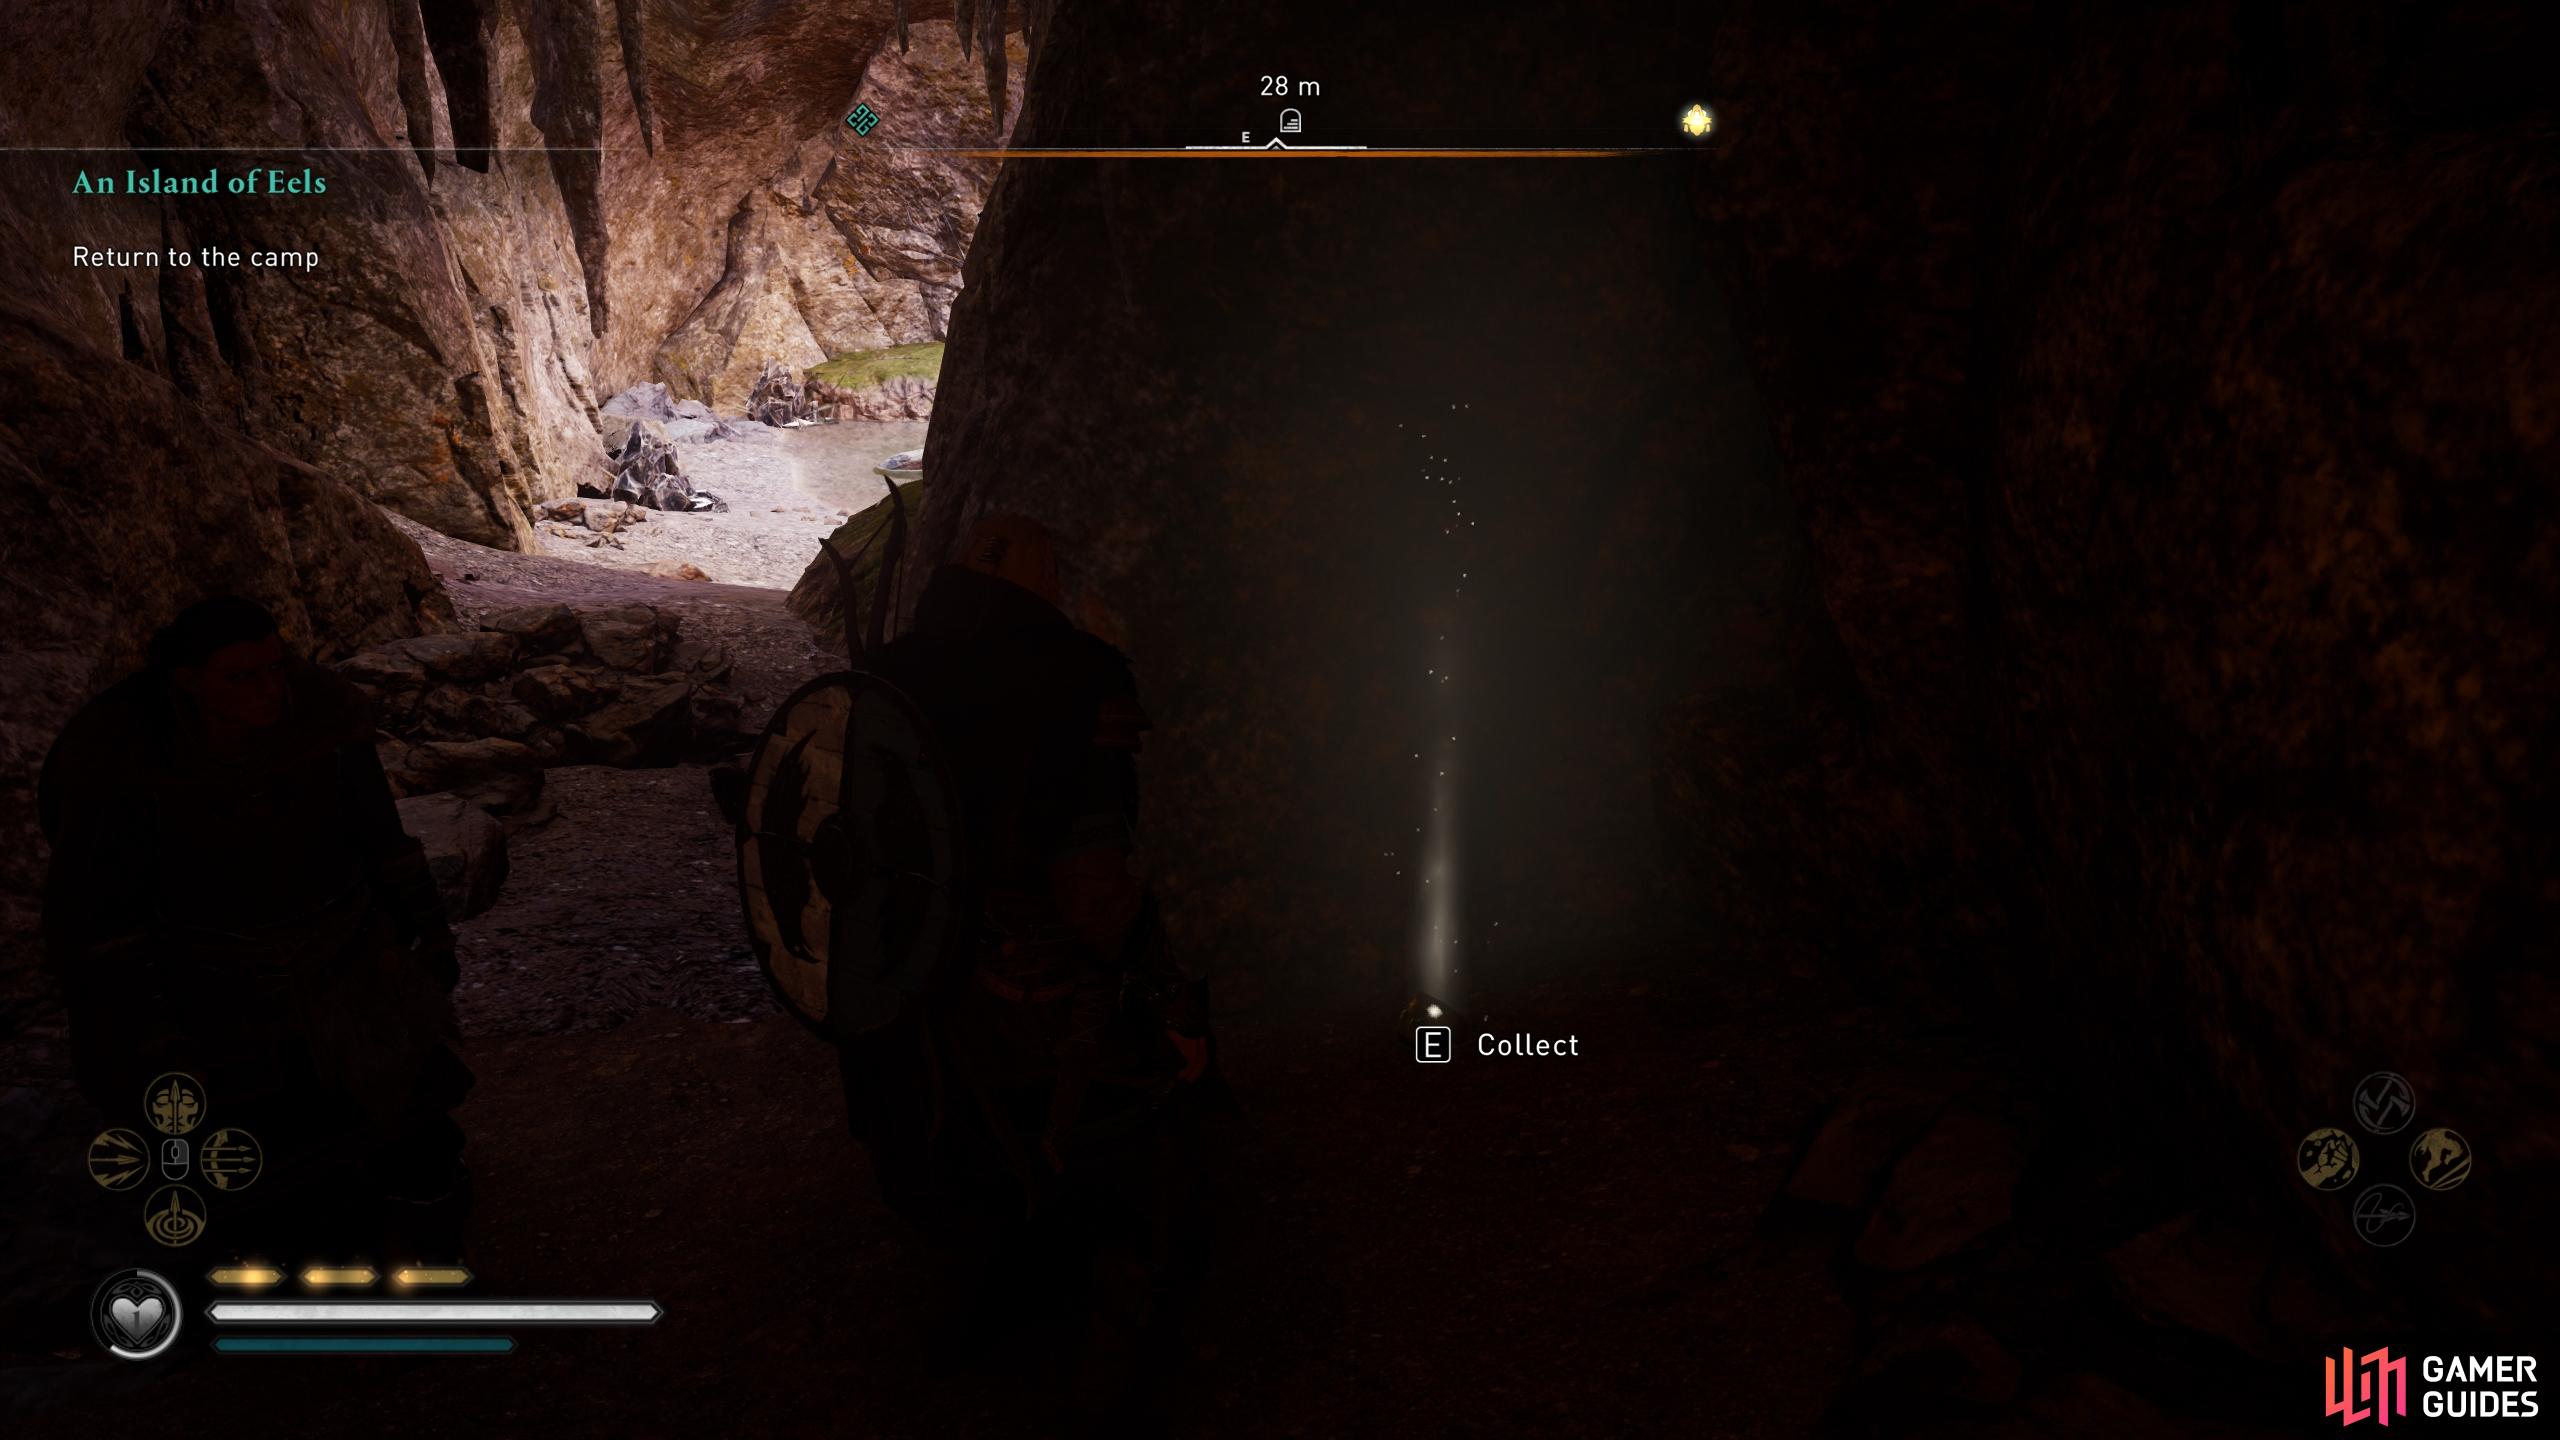 Be sure to collect the Opal near the entrance to the cave.